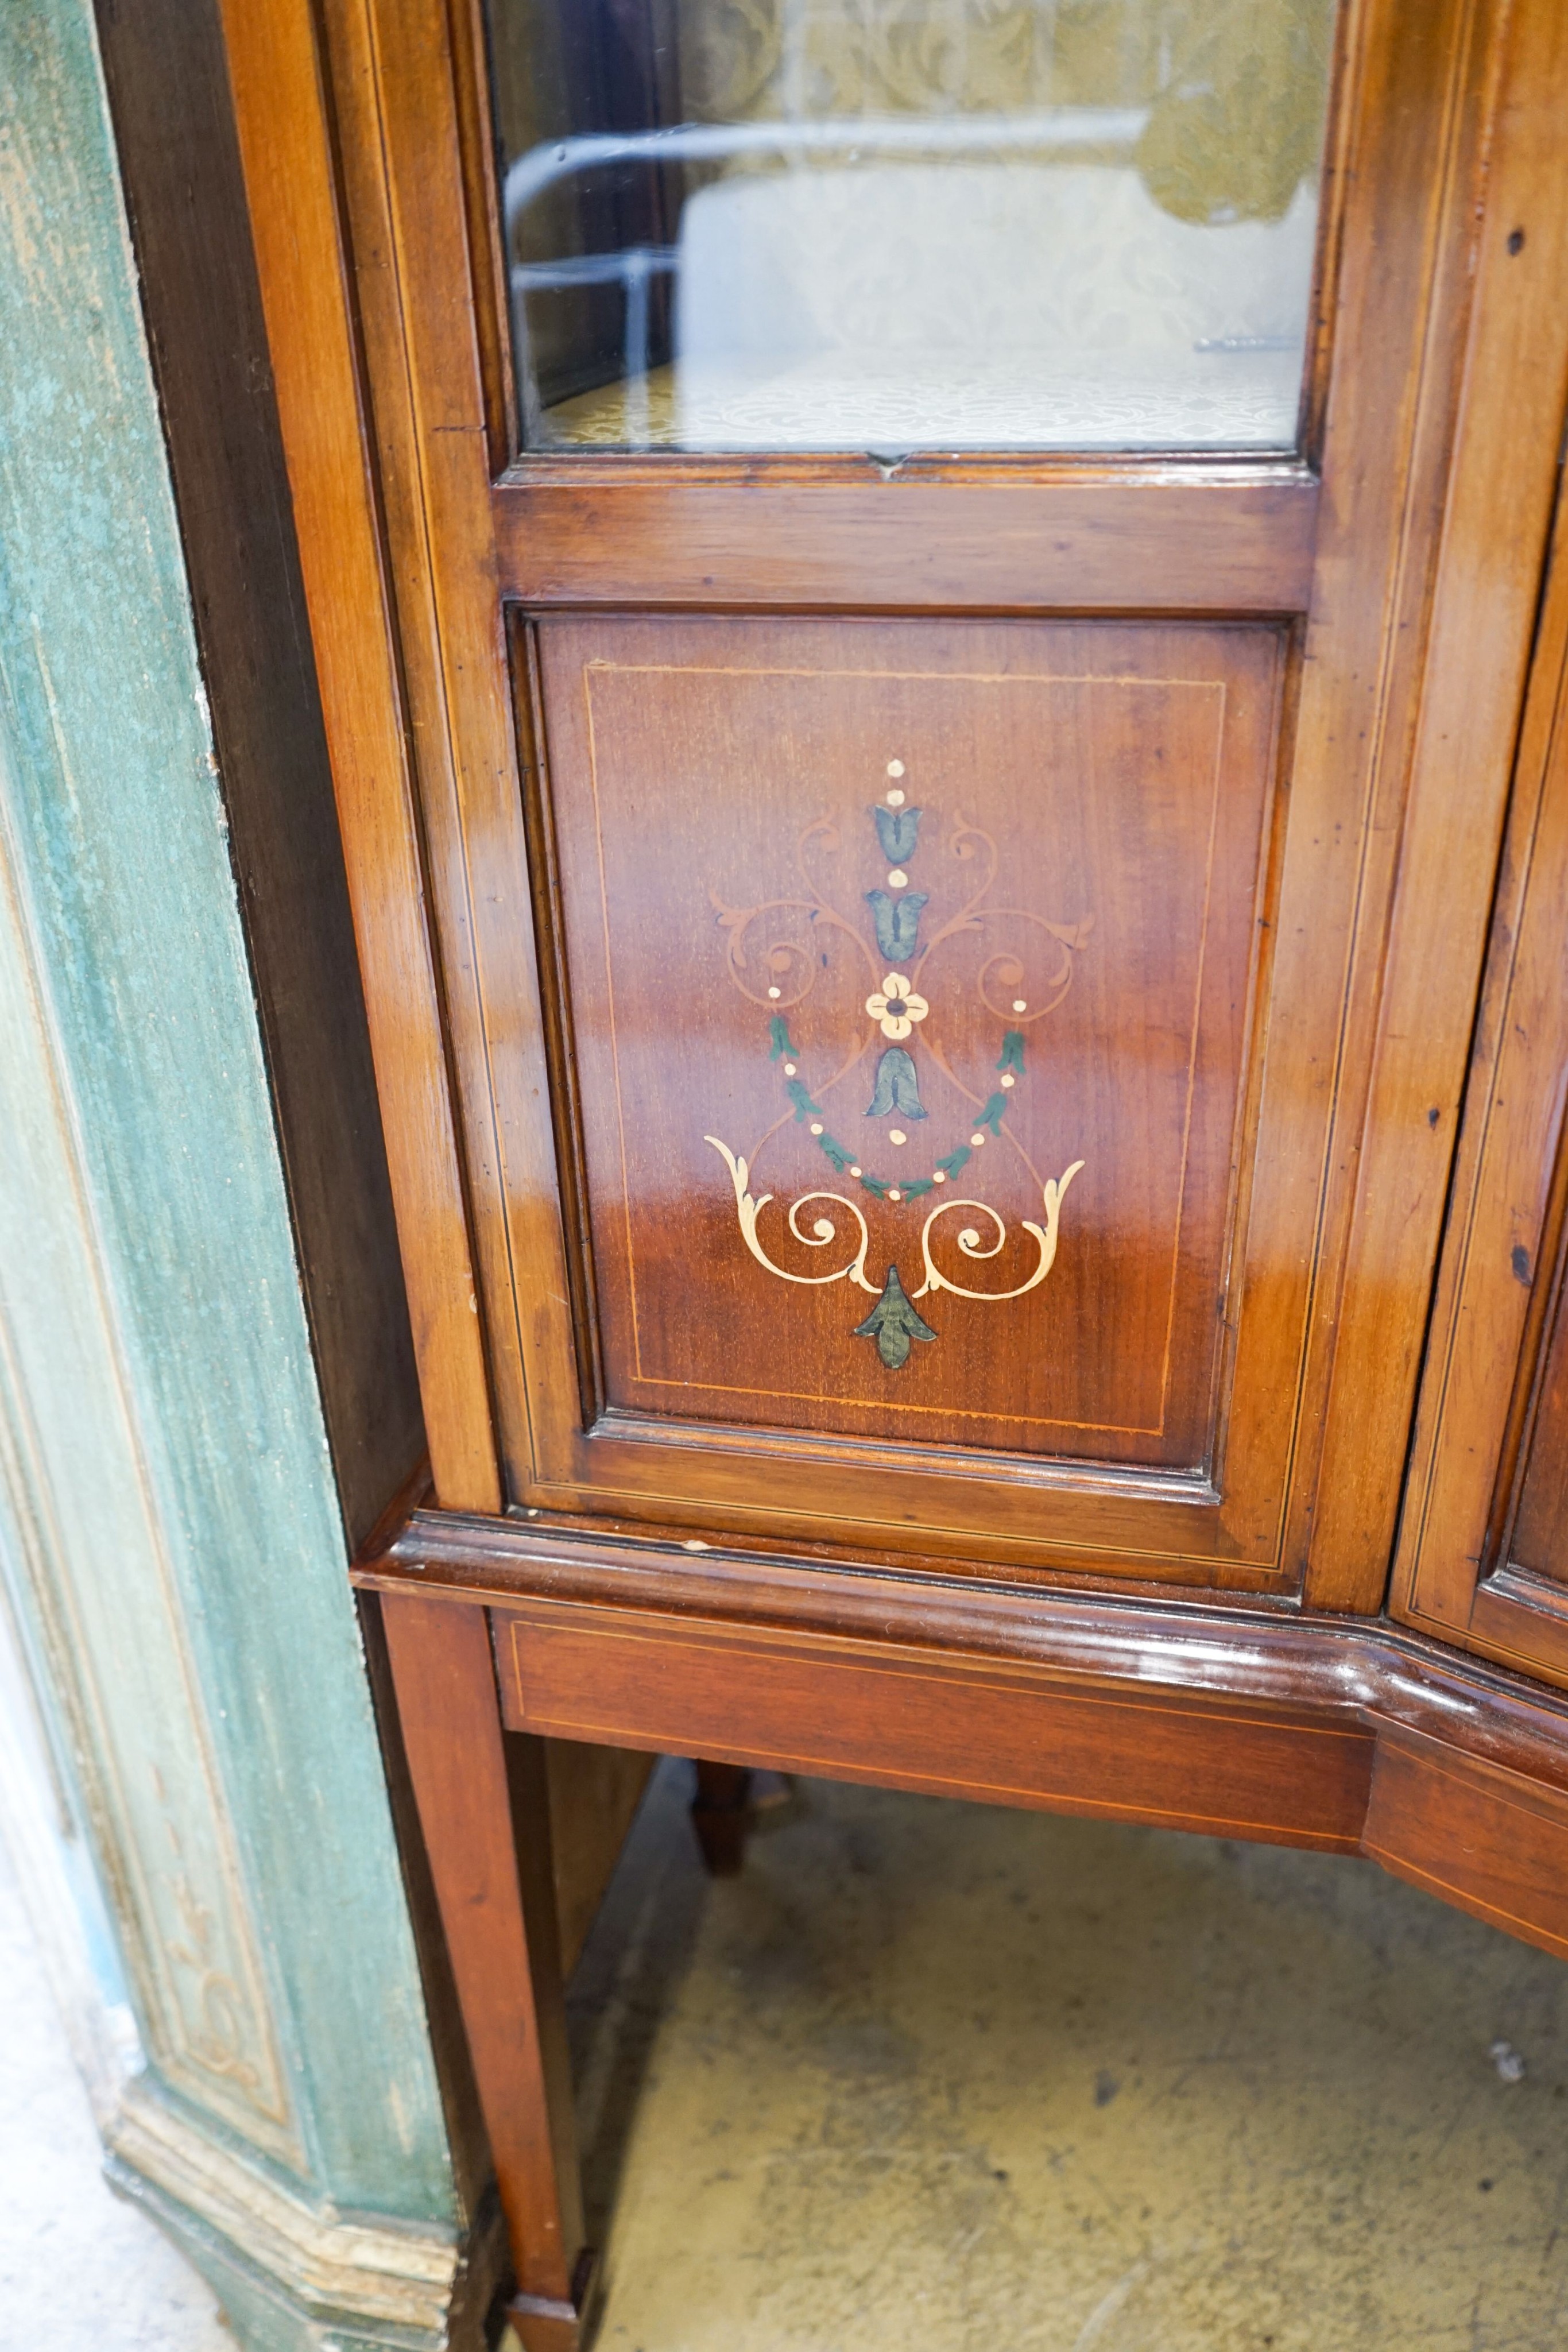 An Edwardian inlaid mahogany bow front display cabinet, width 115cm, depth 43cm, height 178cm